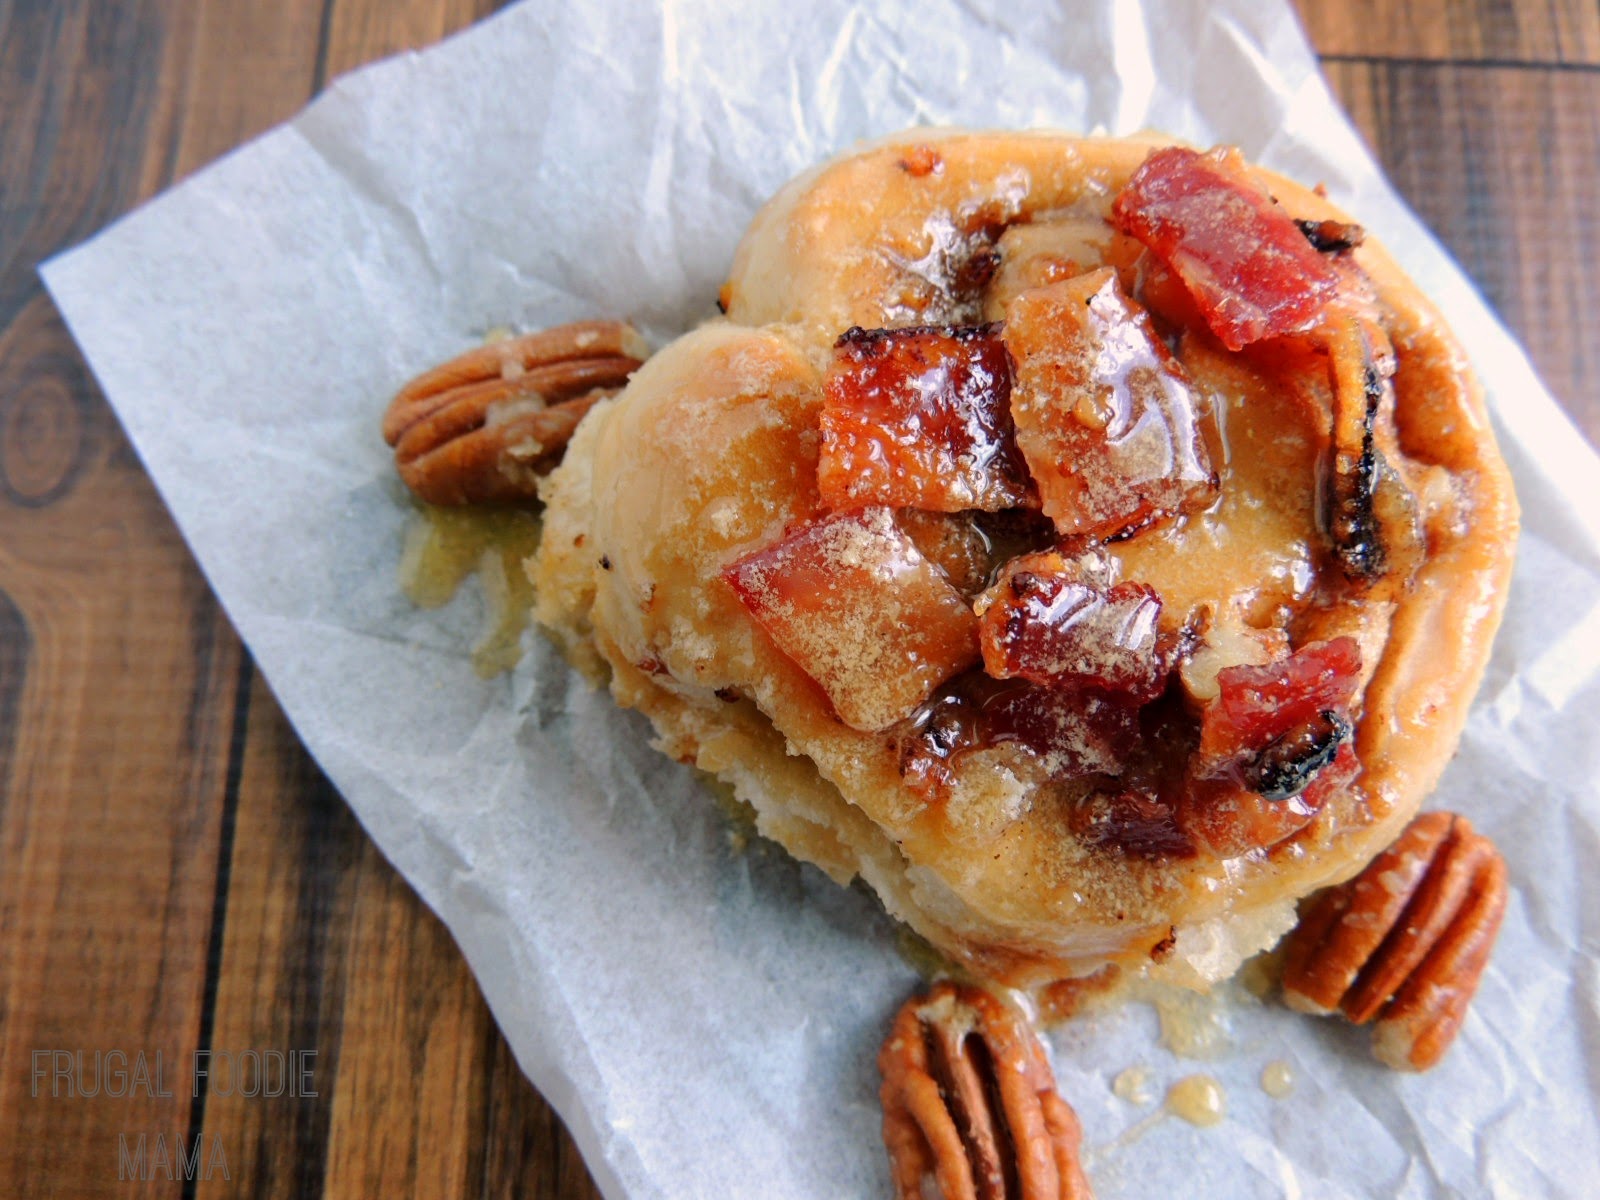 These Brown Sugar Glazed Bacon Butter Pecan Sweet Rolls start with a box of butter pecan cake mix, are filled with crunchy pecans, and are then topped with a sweet brown sugar glaze and salty bacon.